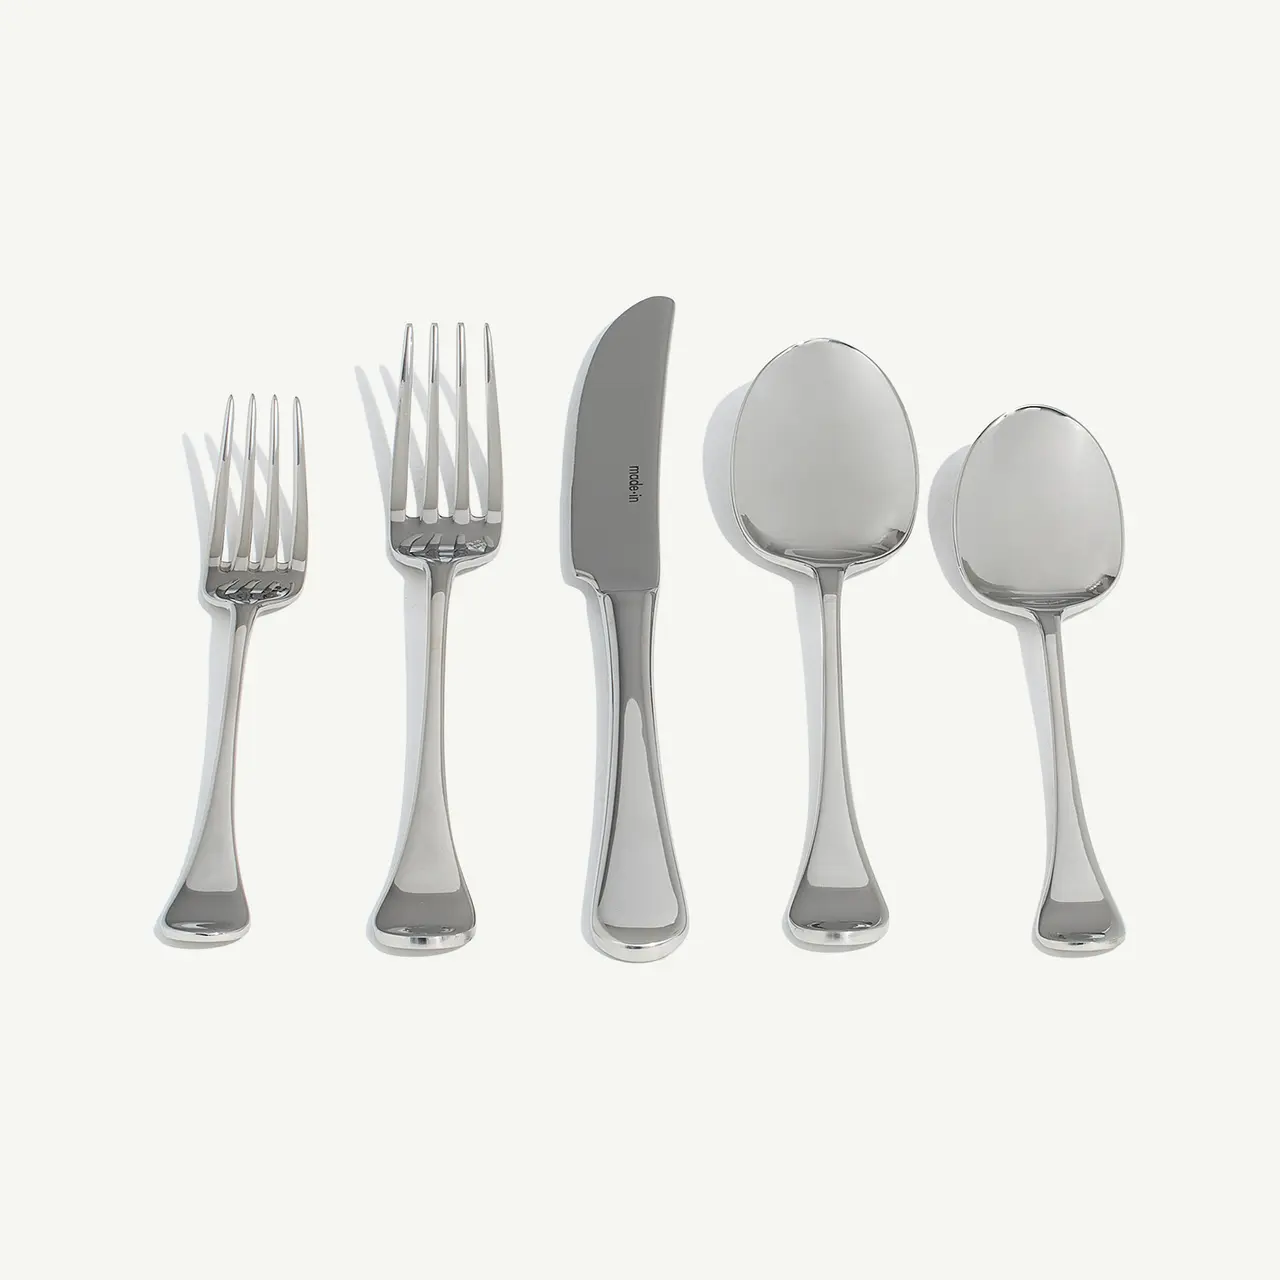 A set of silver flatware consisting of two forks, a knife, and two spoons arranged side by side against a light background.